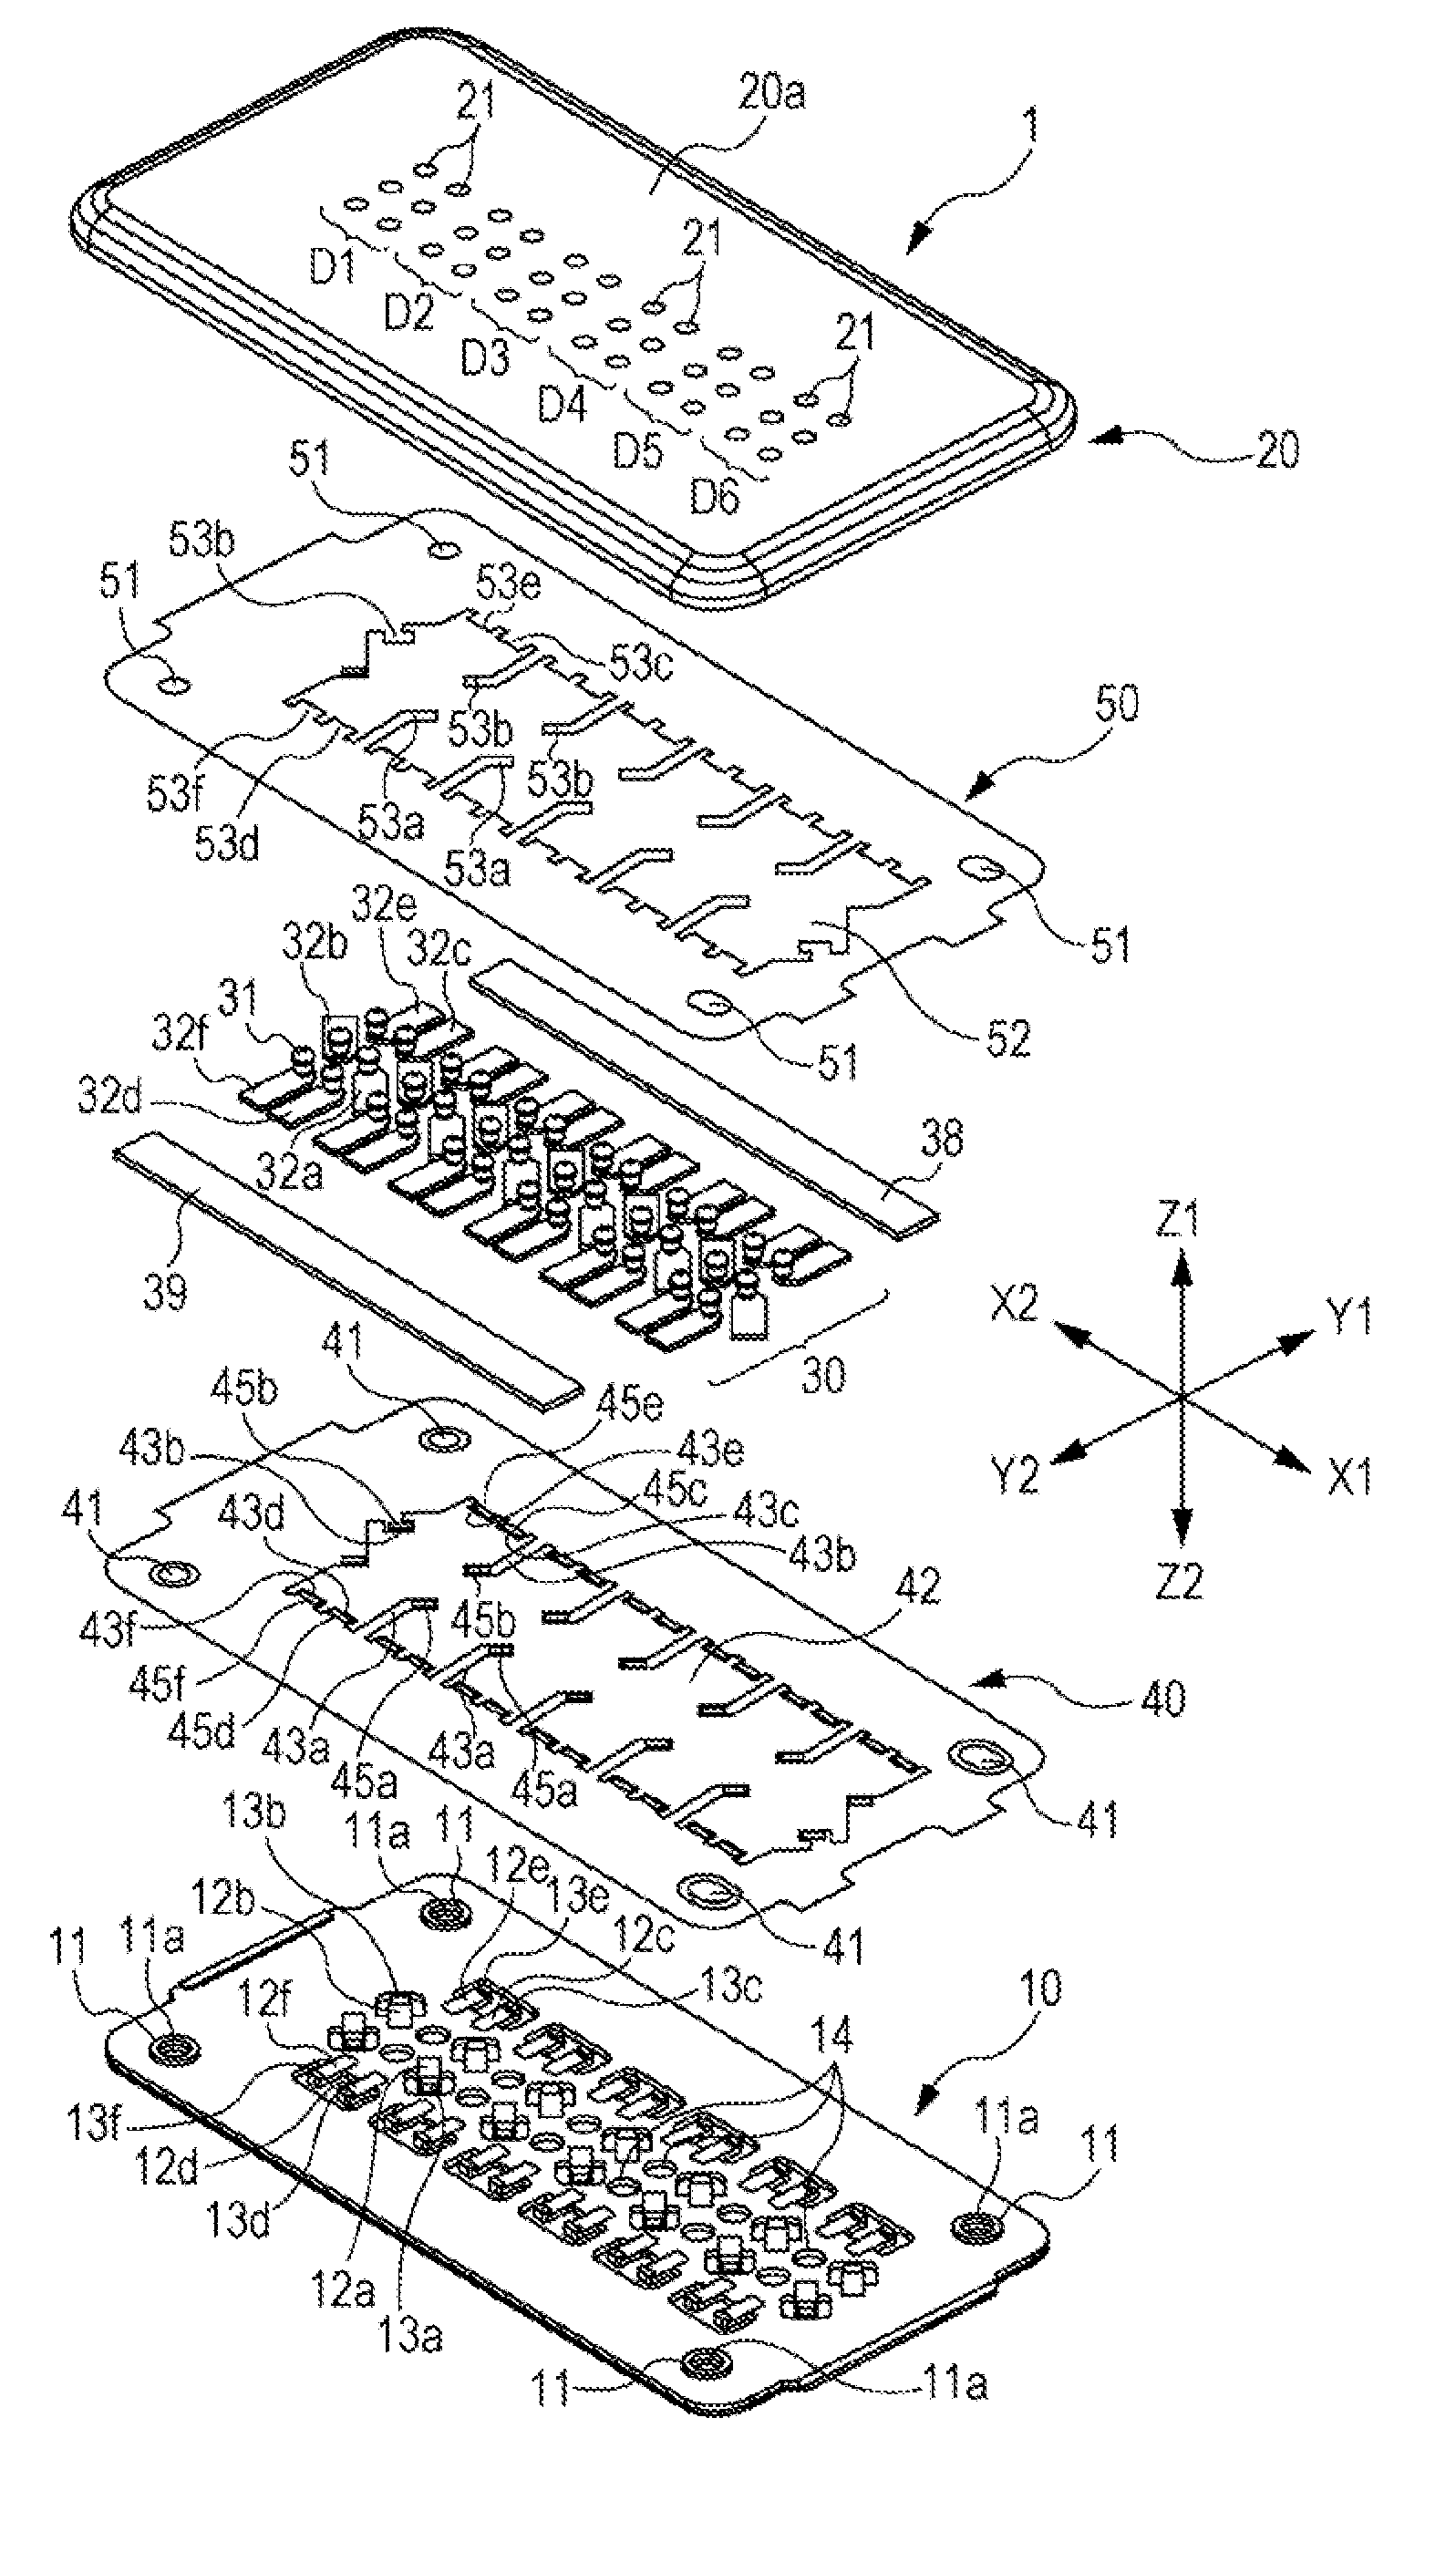 Tactile display device